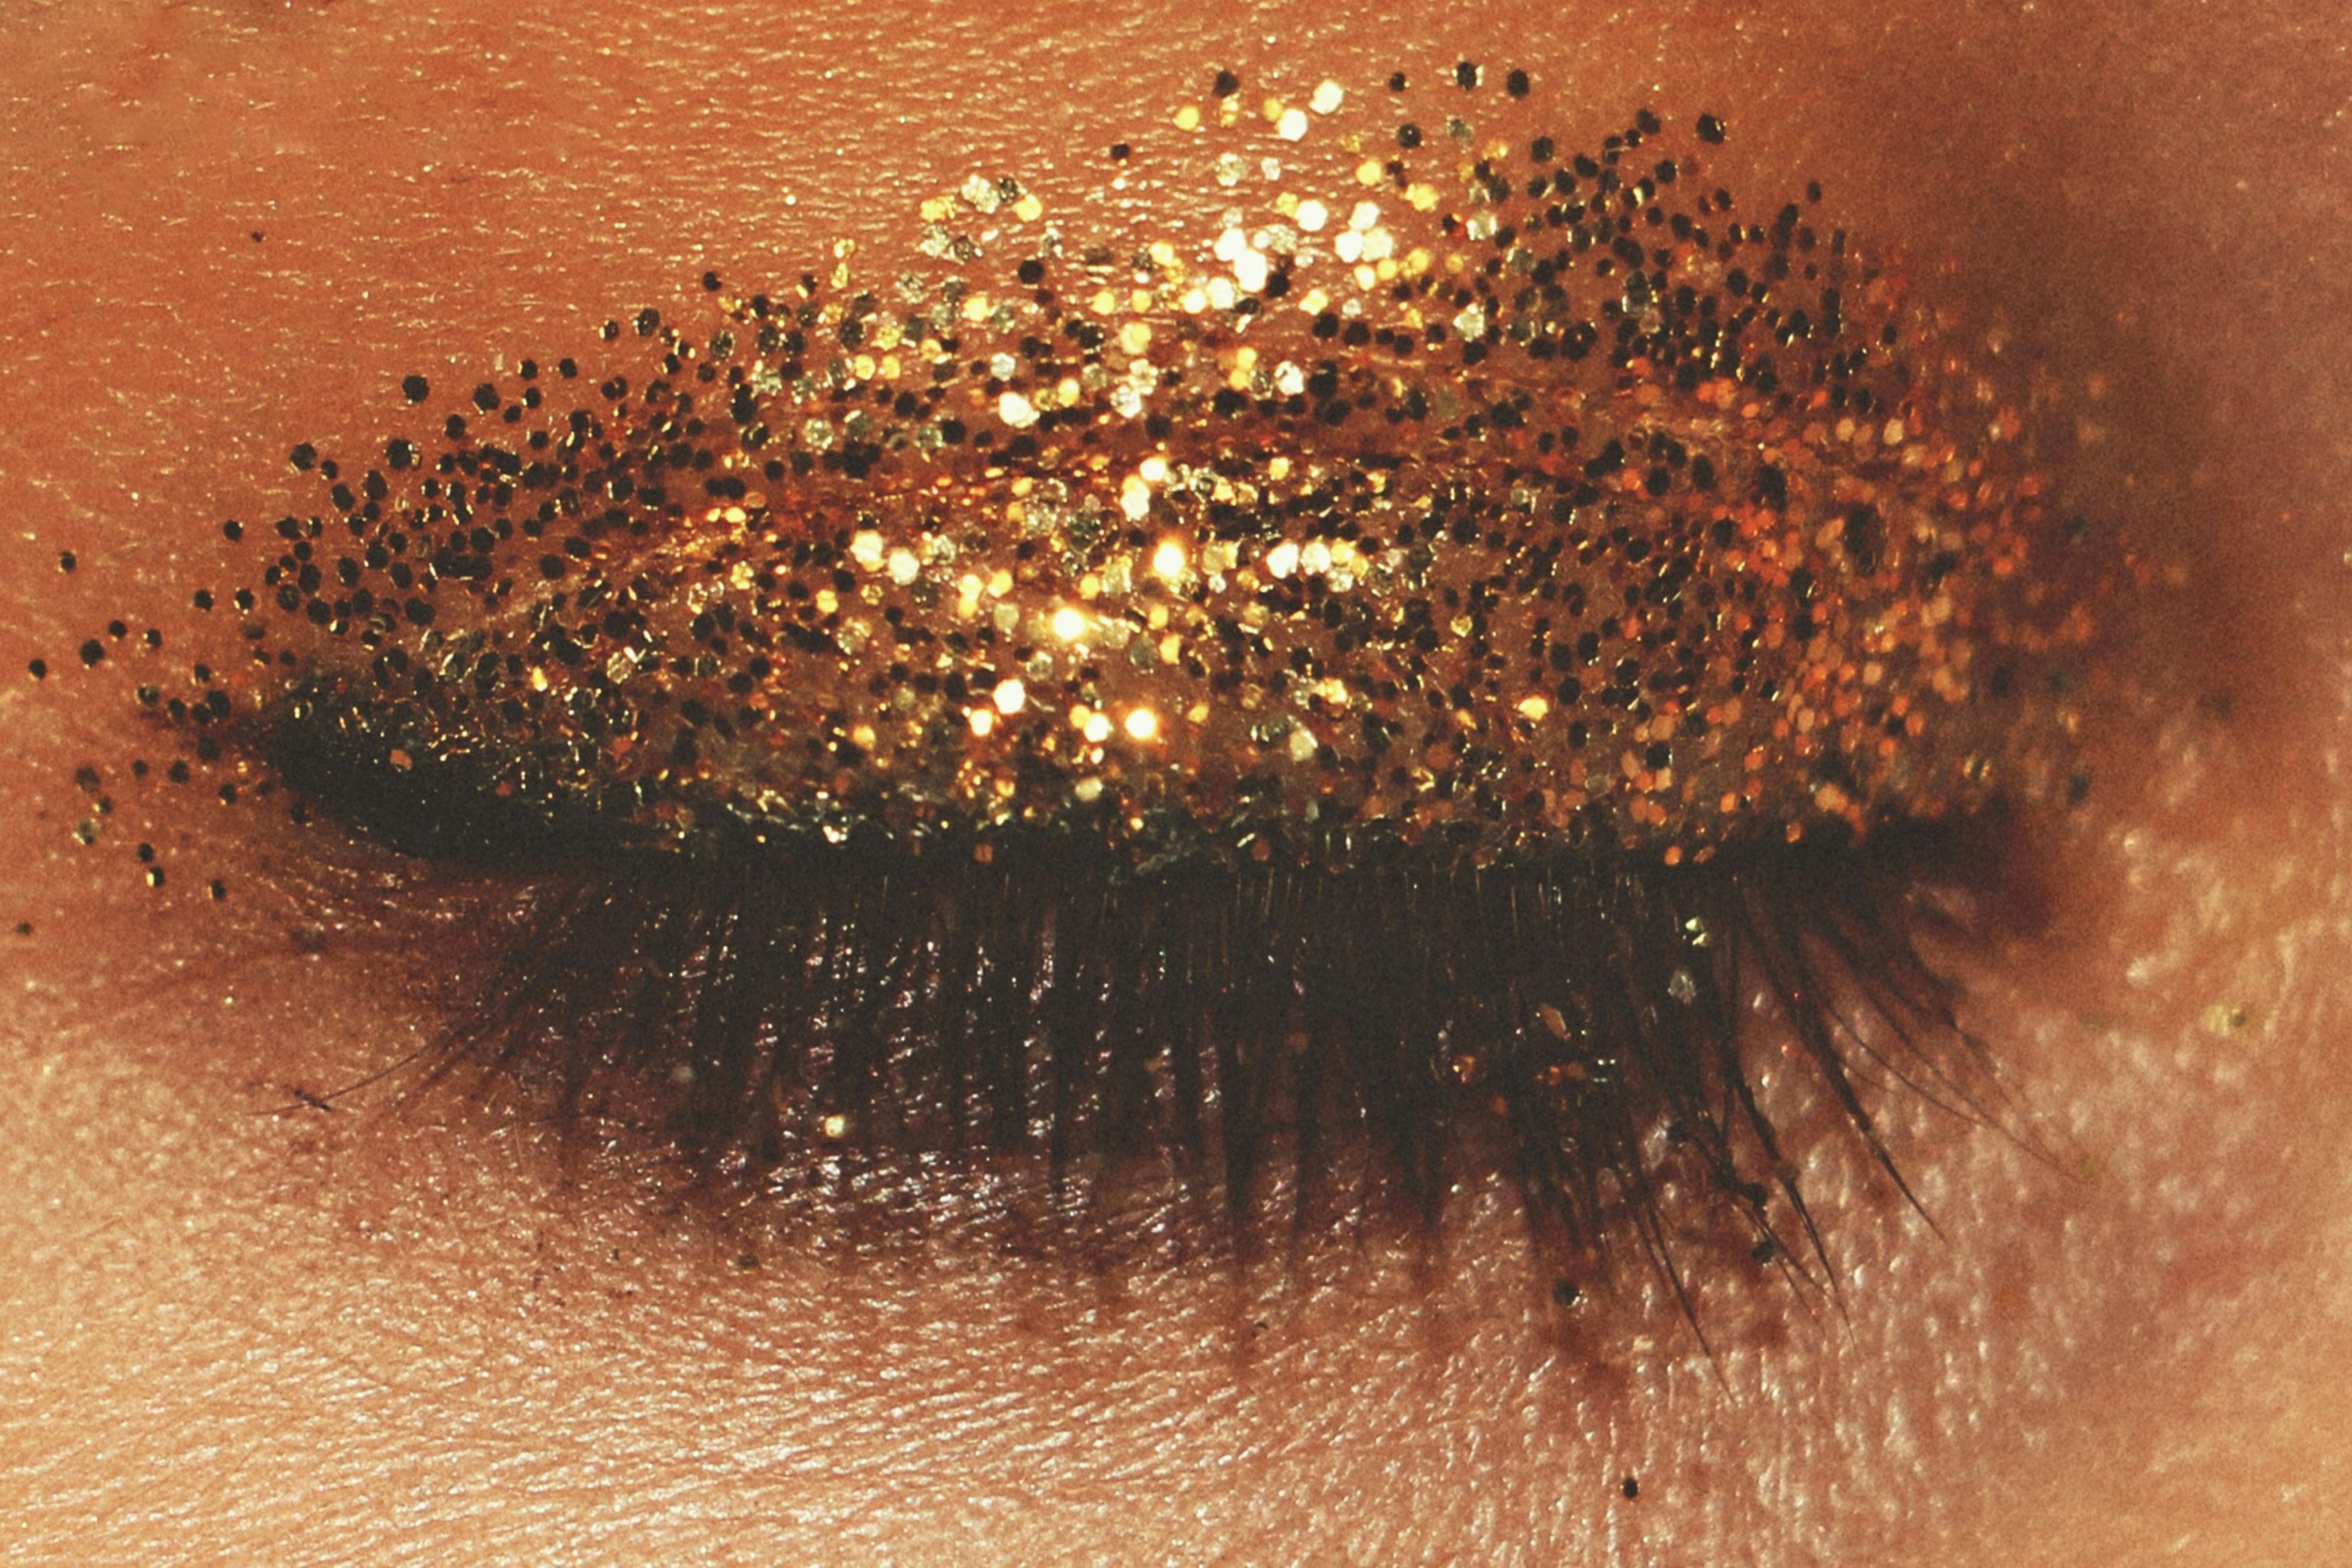 How To Apply Glitter Eyeshadow, According To Beauty Experts